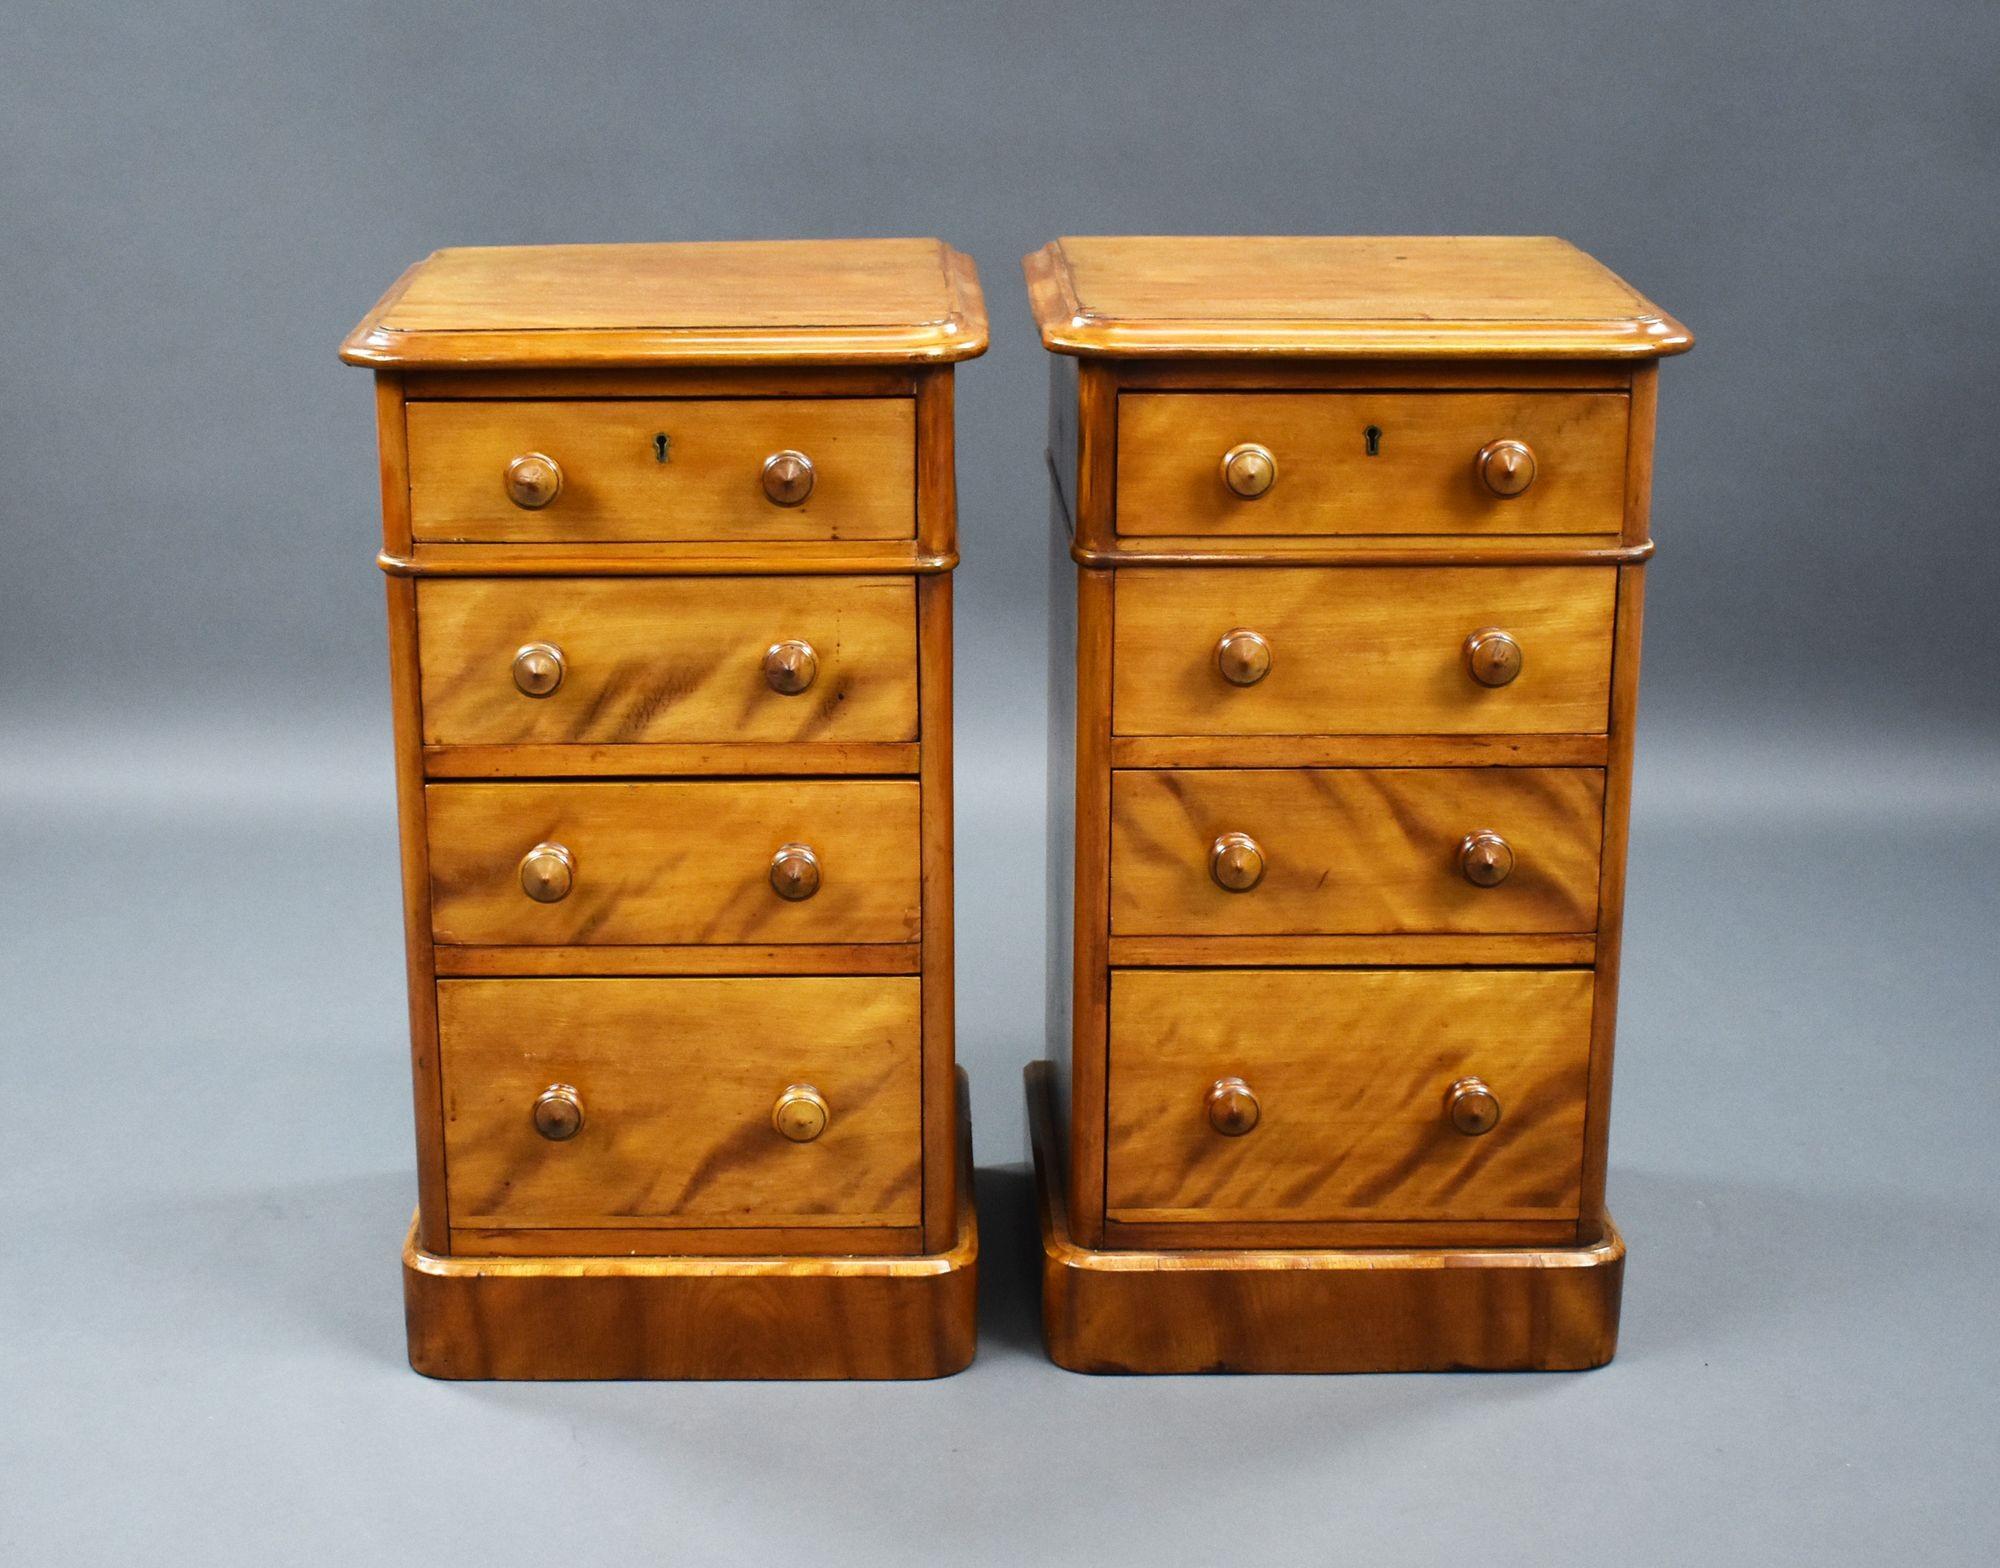 For sale is a good quality pair of Victorian satin walnut bedside chests by H Goodall of Newcastle. Each chest has an arrangement of four graduated drawers, each with original turned handles, standing on plinth bases. Both chests are in very good